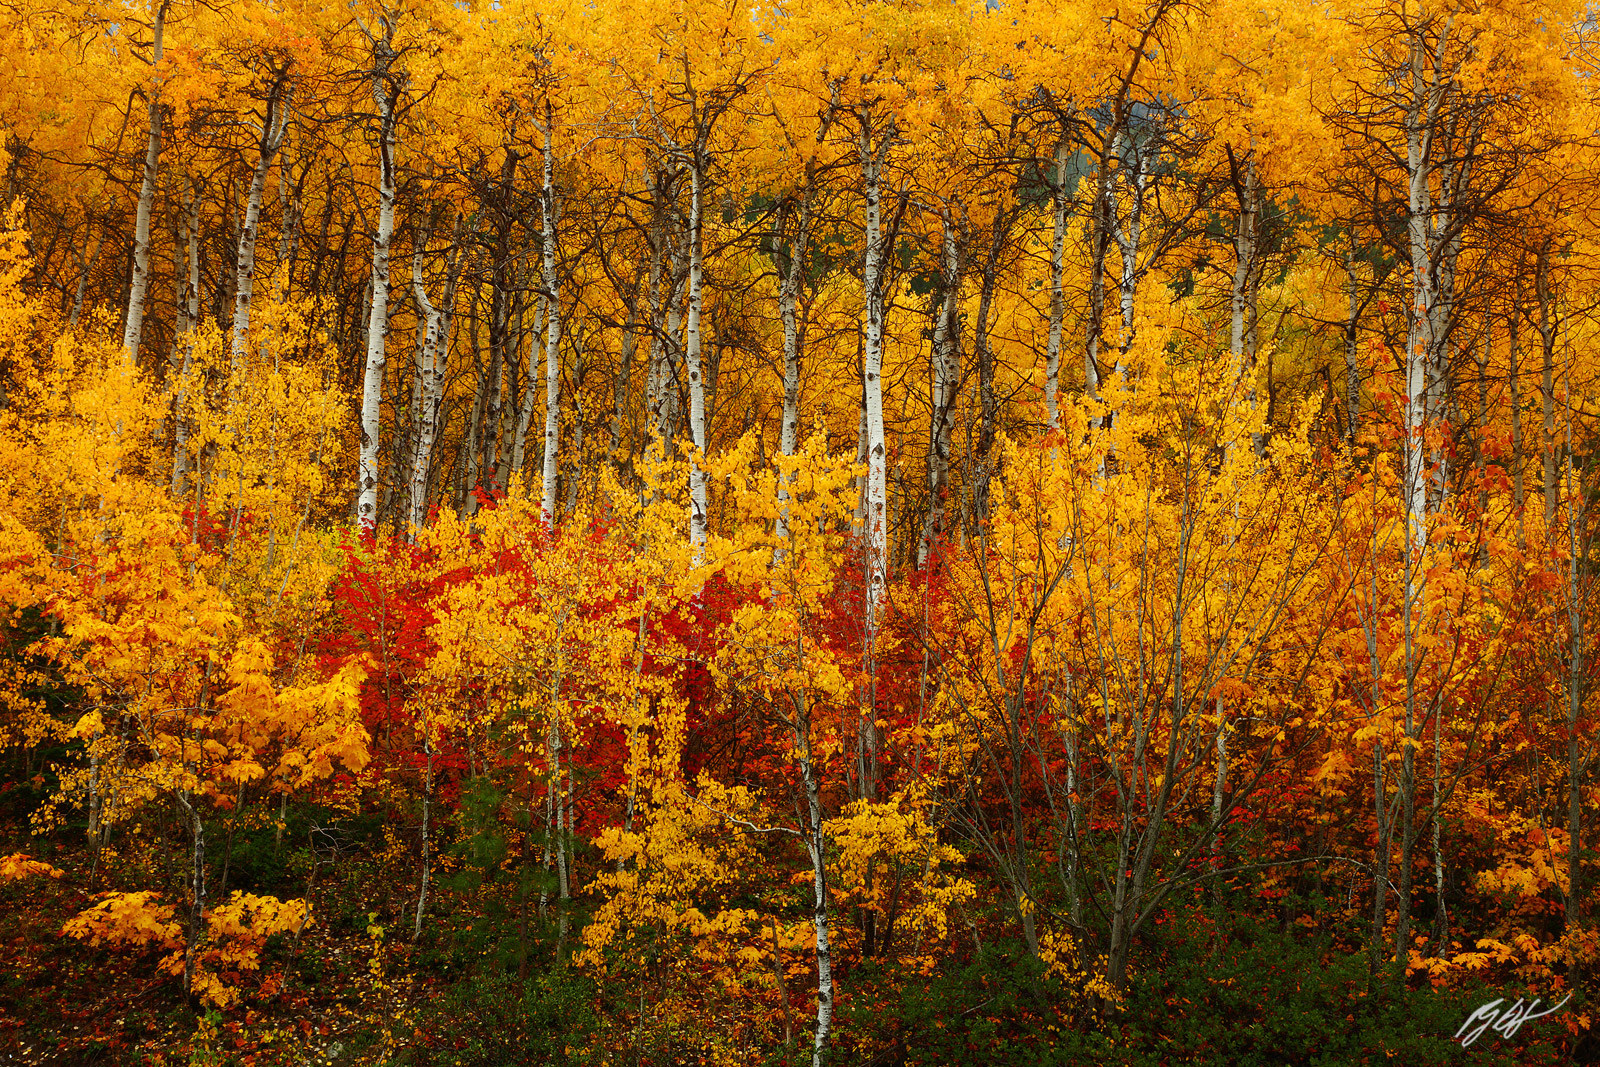 Fall Color and Aspens in the Wenatchee National Forest in Washington